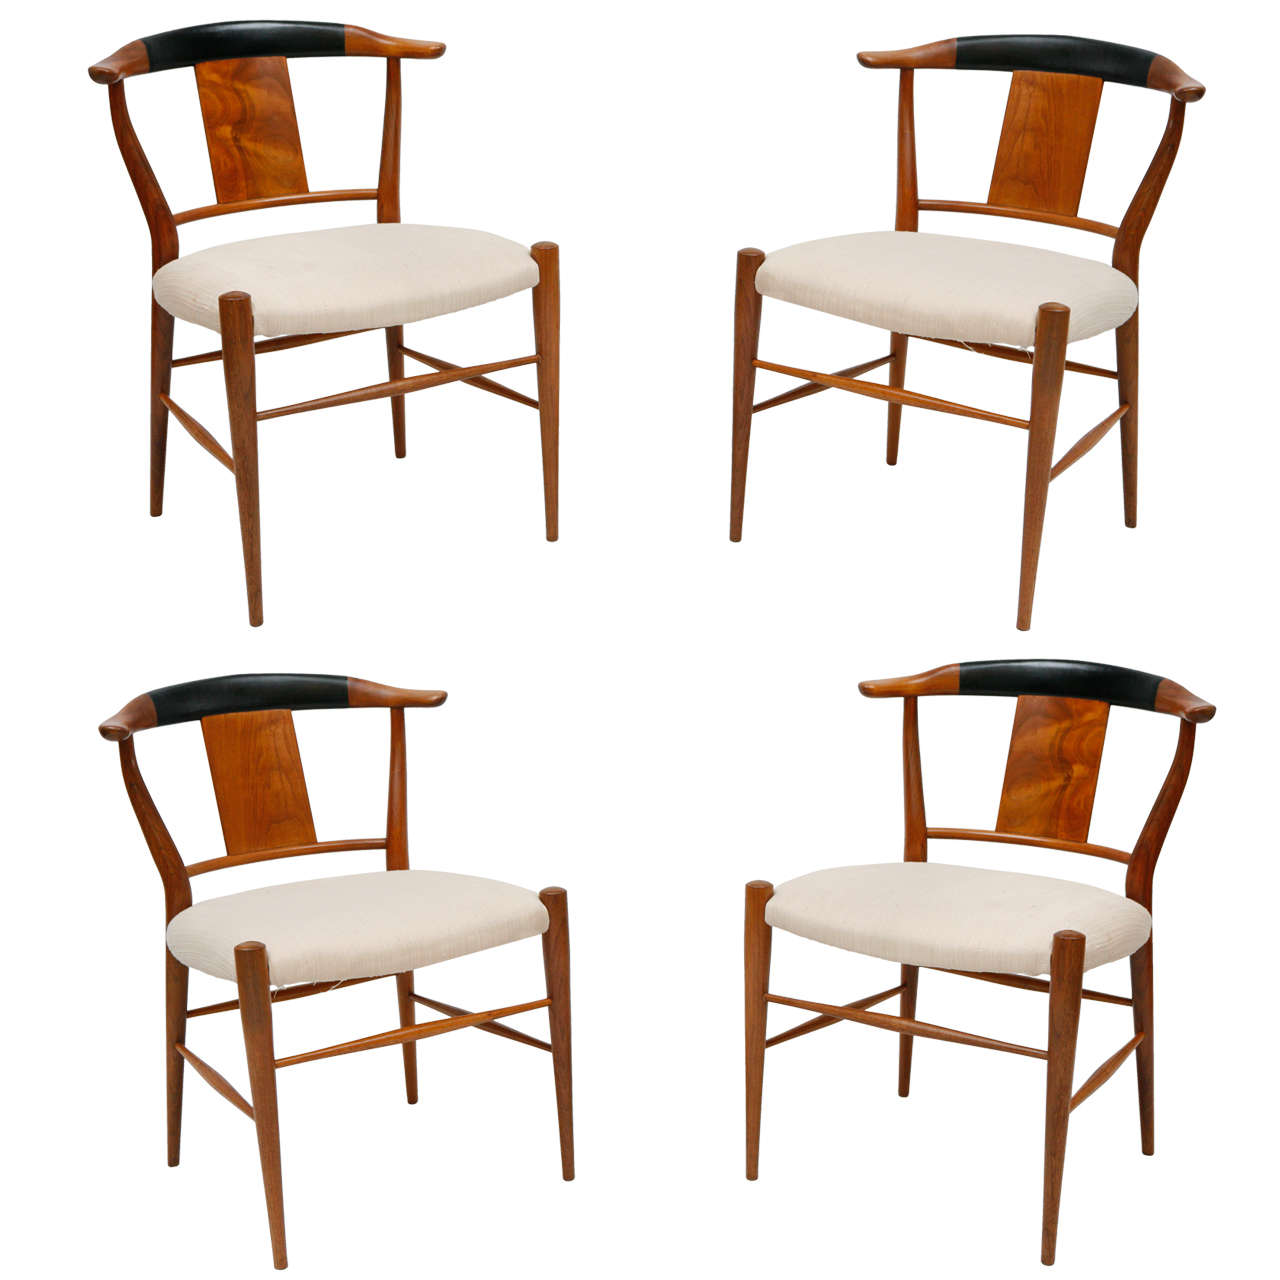 4 Walnut Cow Horn Chairs